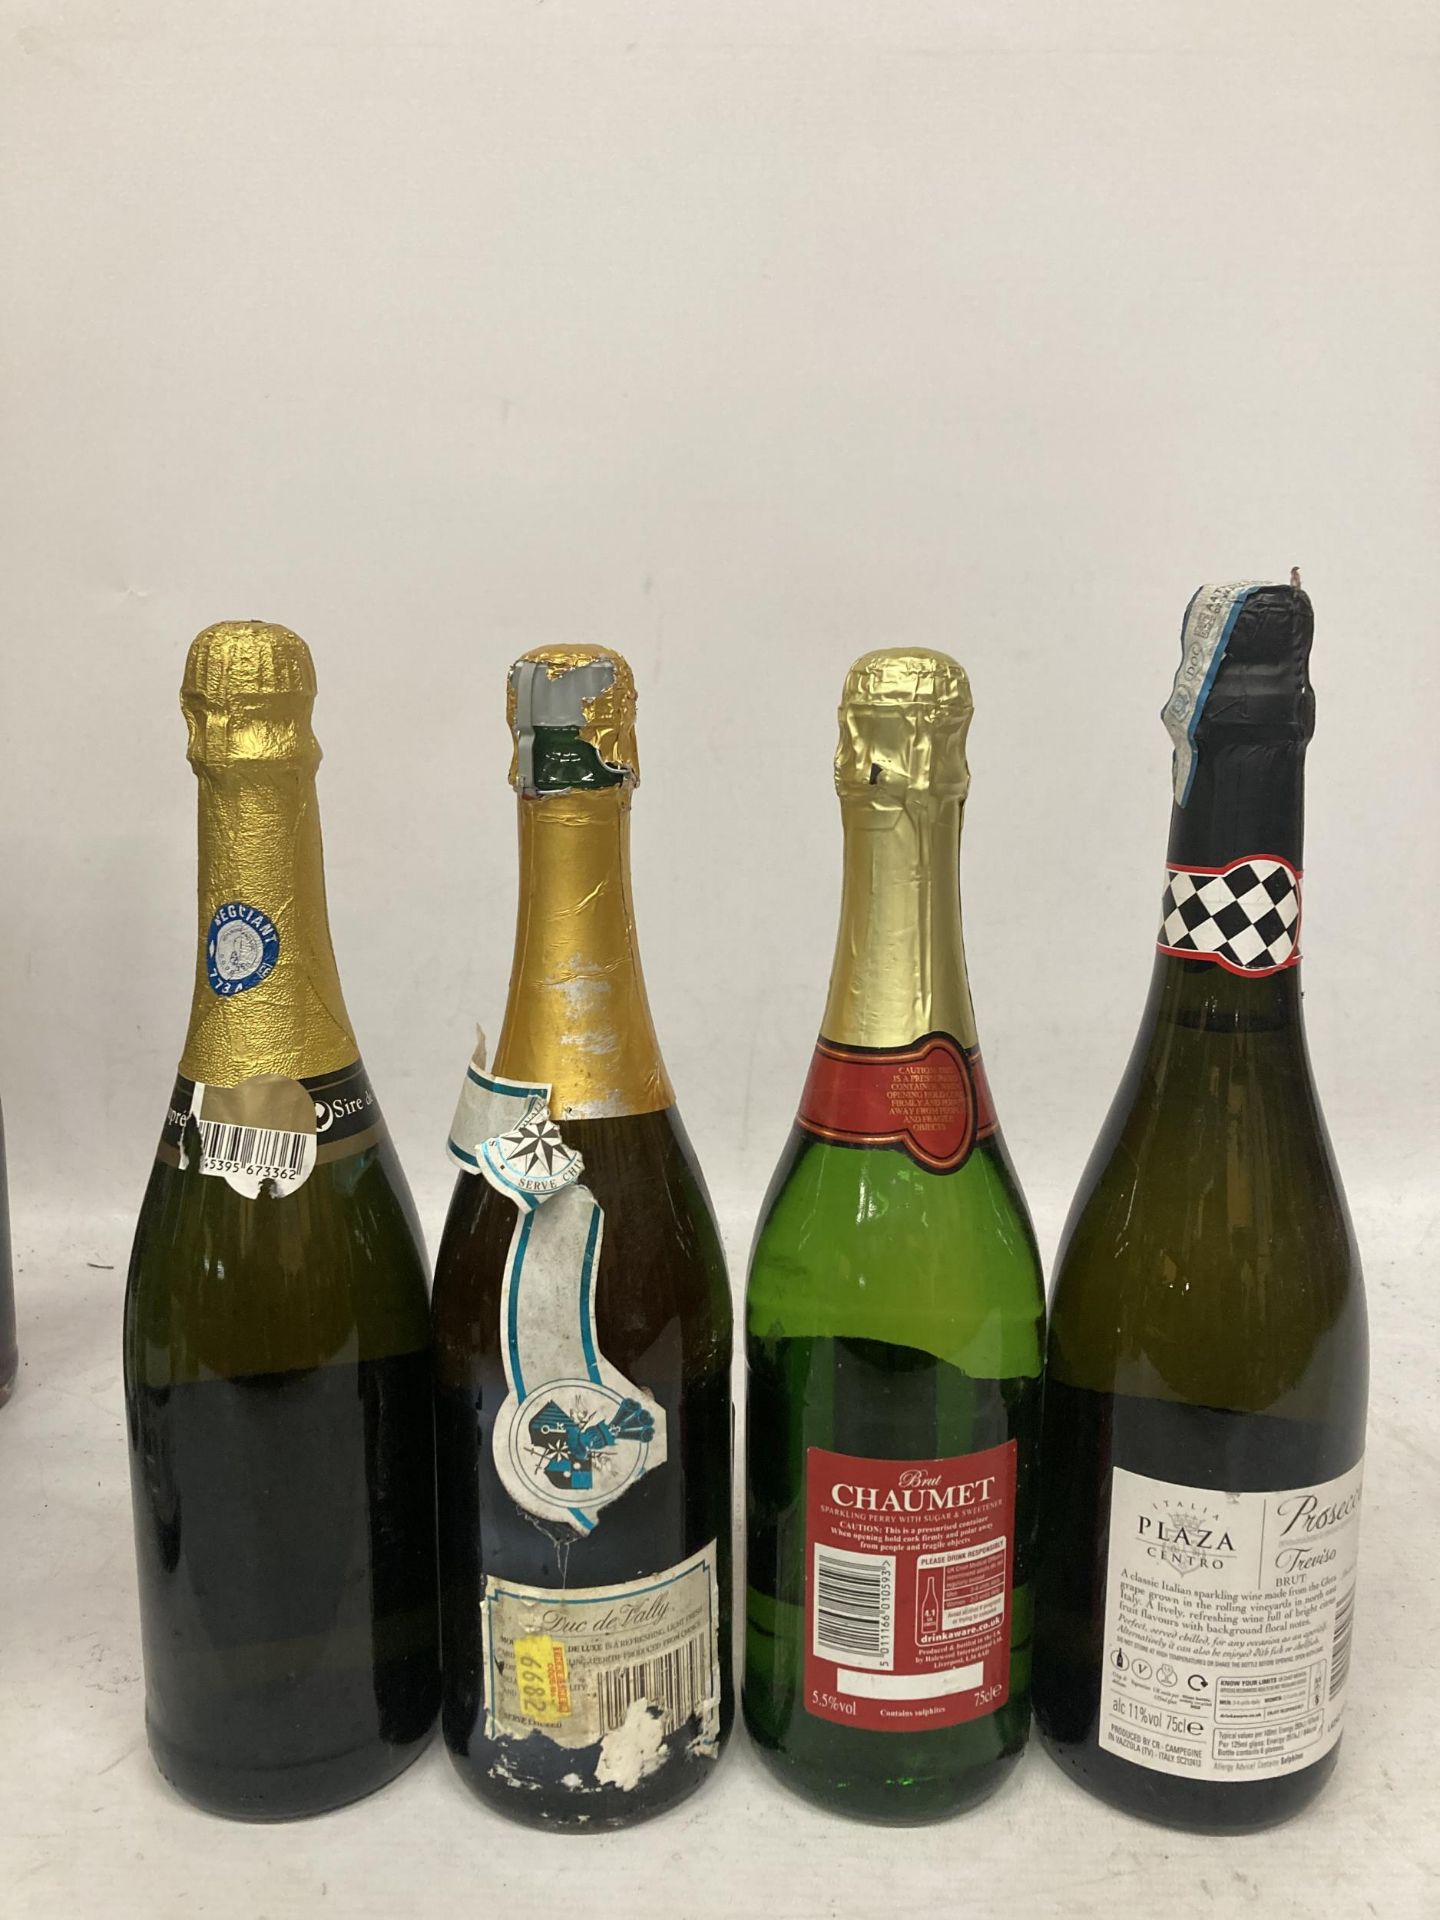 FOUR 75CL BOTTLES - PLAZA PROSECCO, SIRE DE BEAUPRE BRUT, DUC DE VALLY AND CHAUMET BRUT - Image 2 of 2